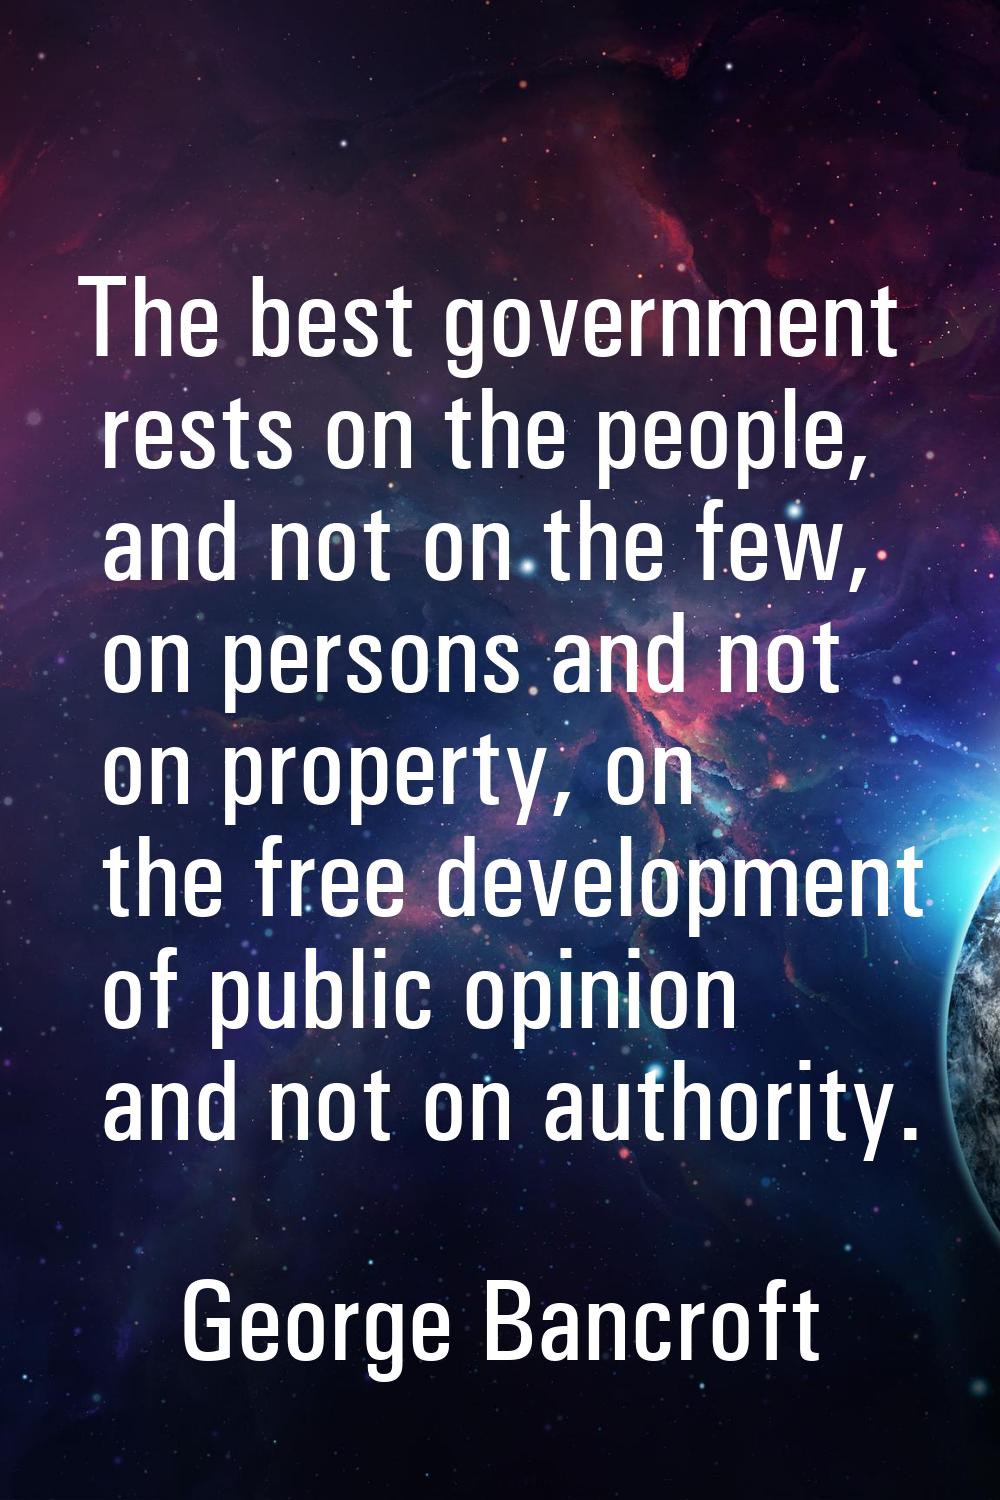 The best government rests on the people, and not on the few, on persons and not on property, on the